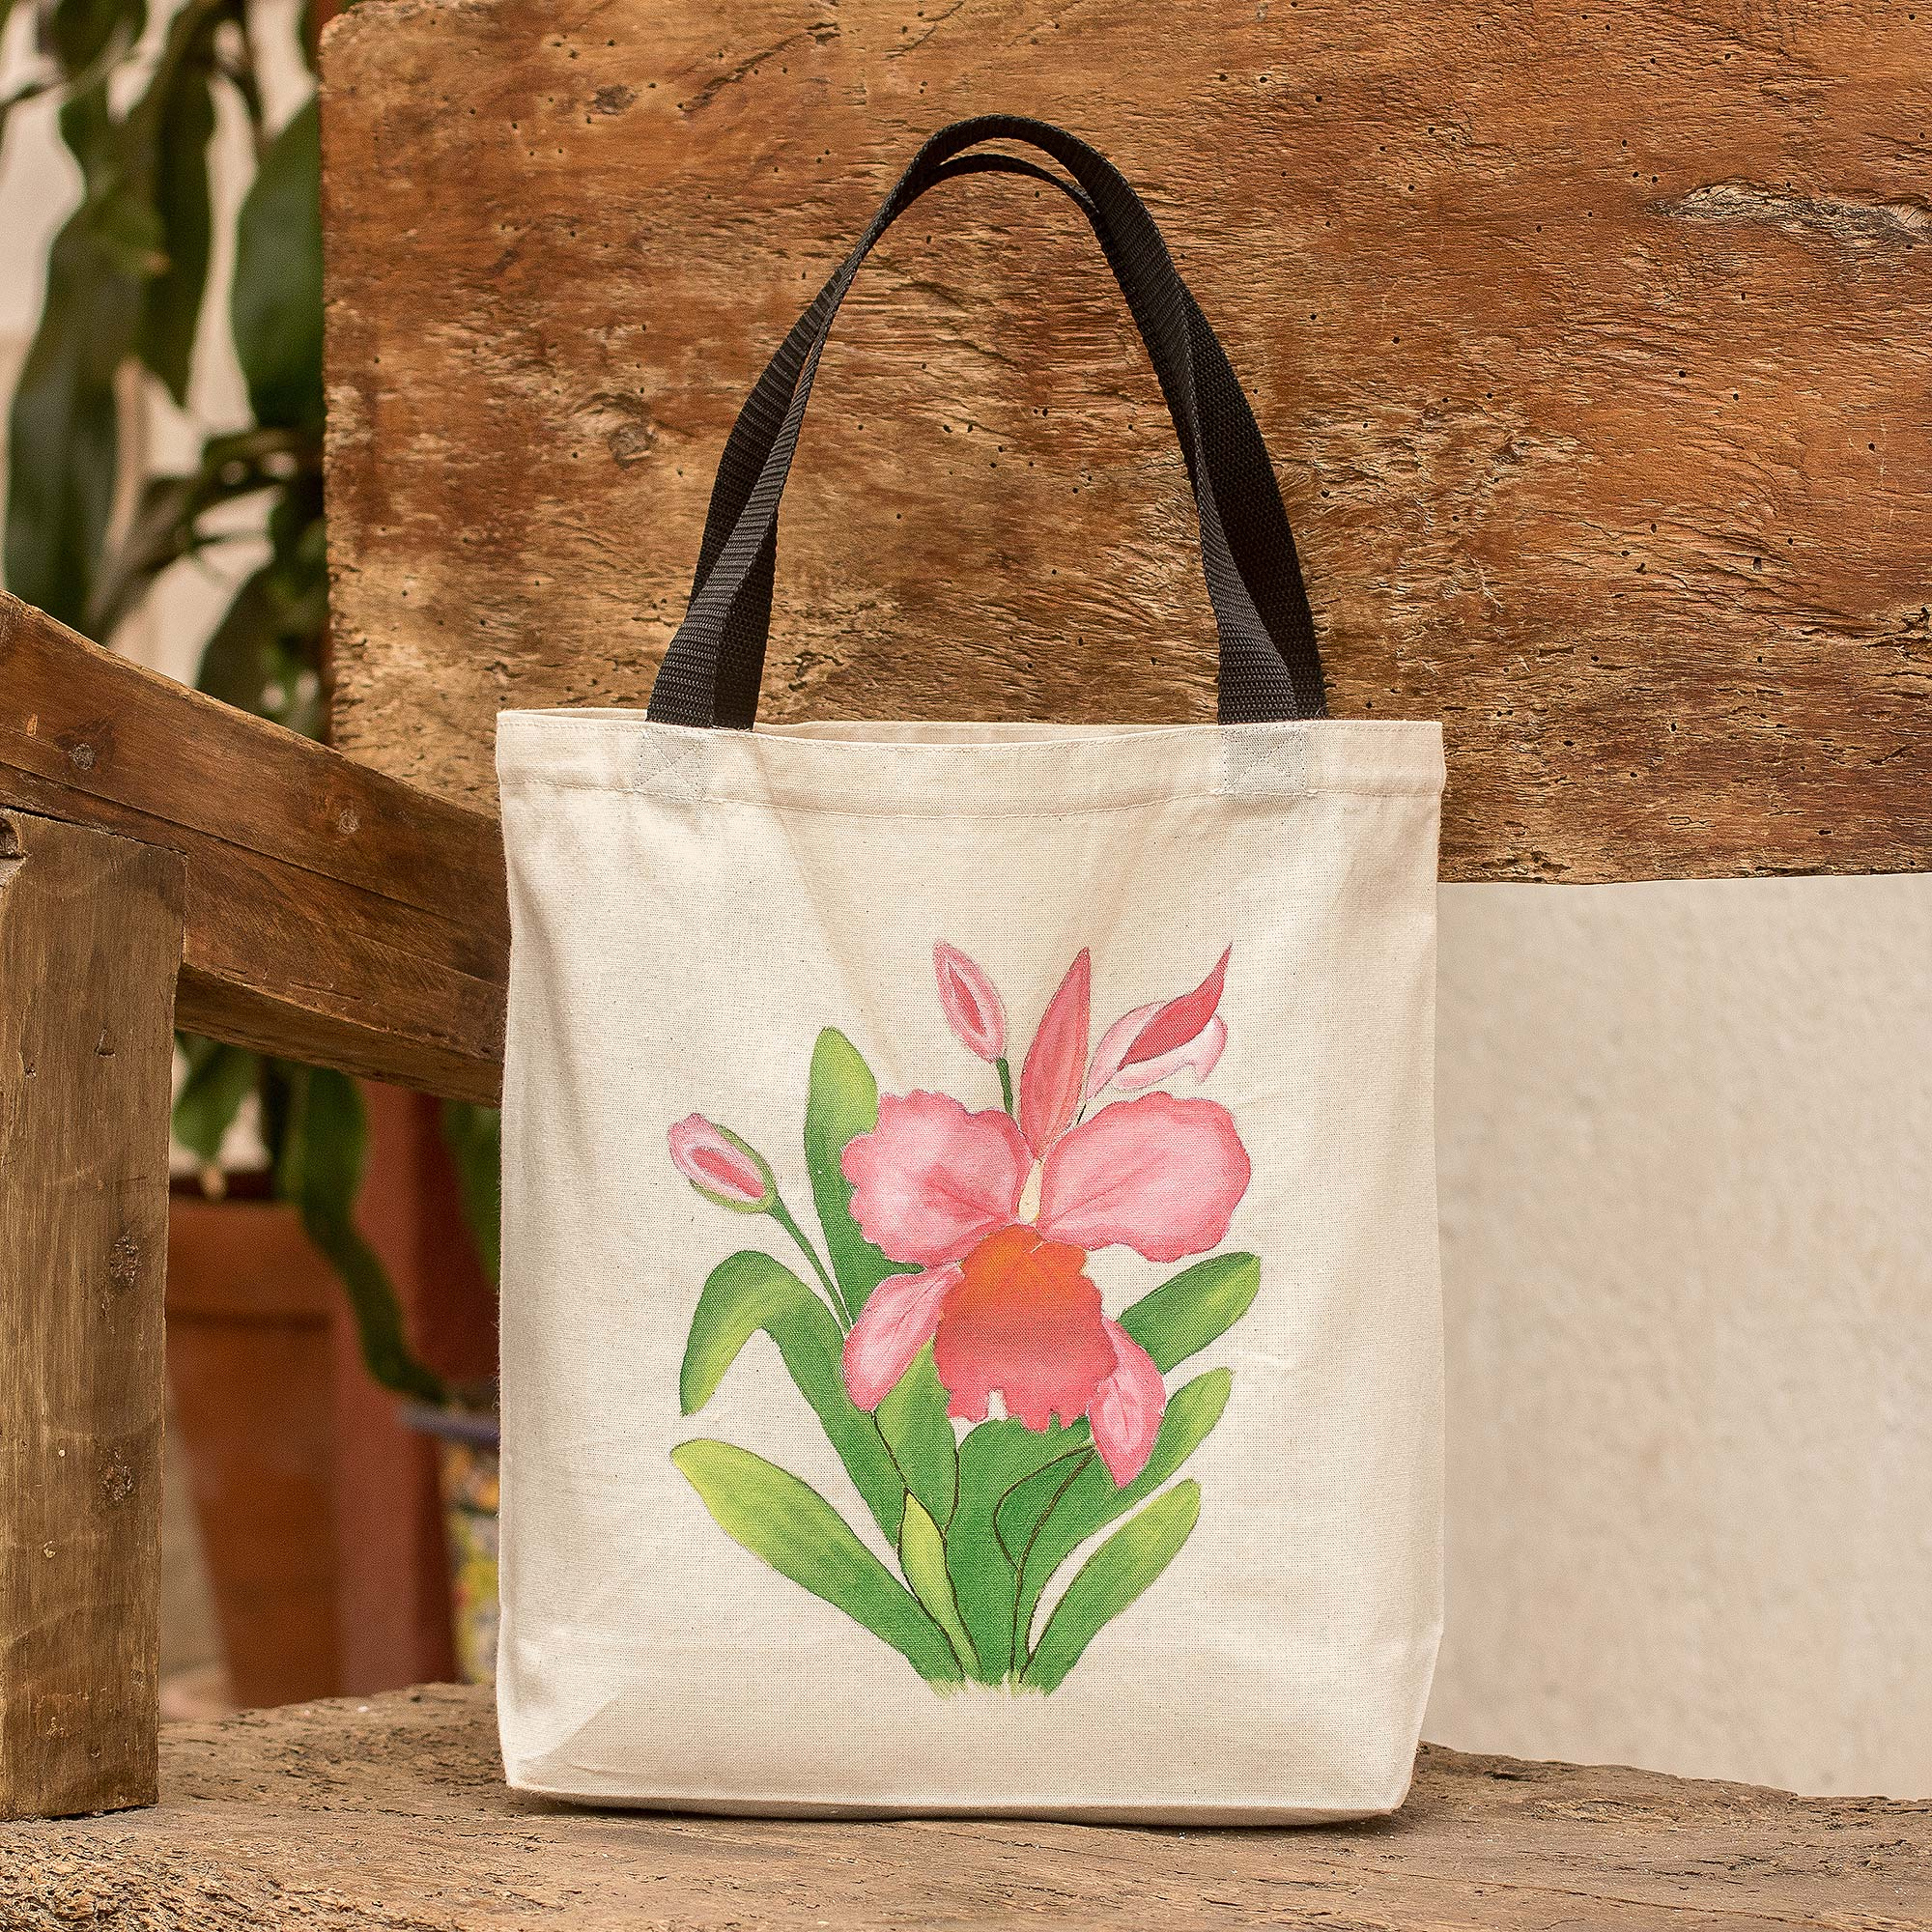 Can I Use Acrylic Paint On Bags? | Sustain The Art